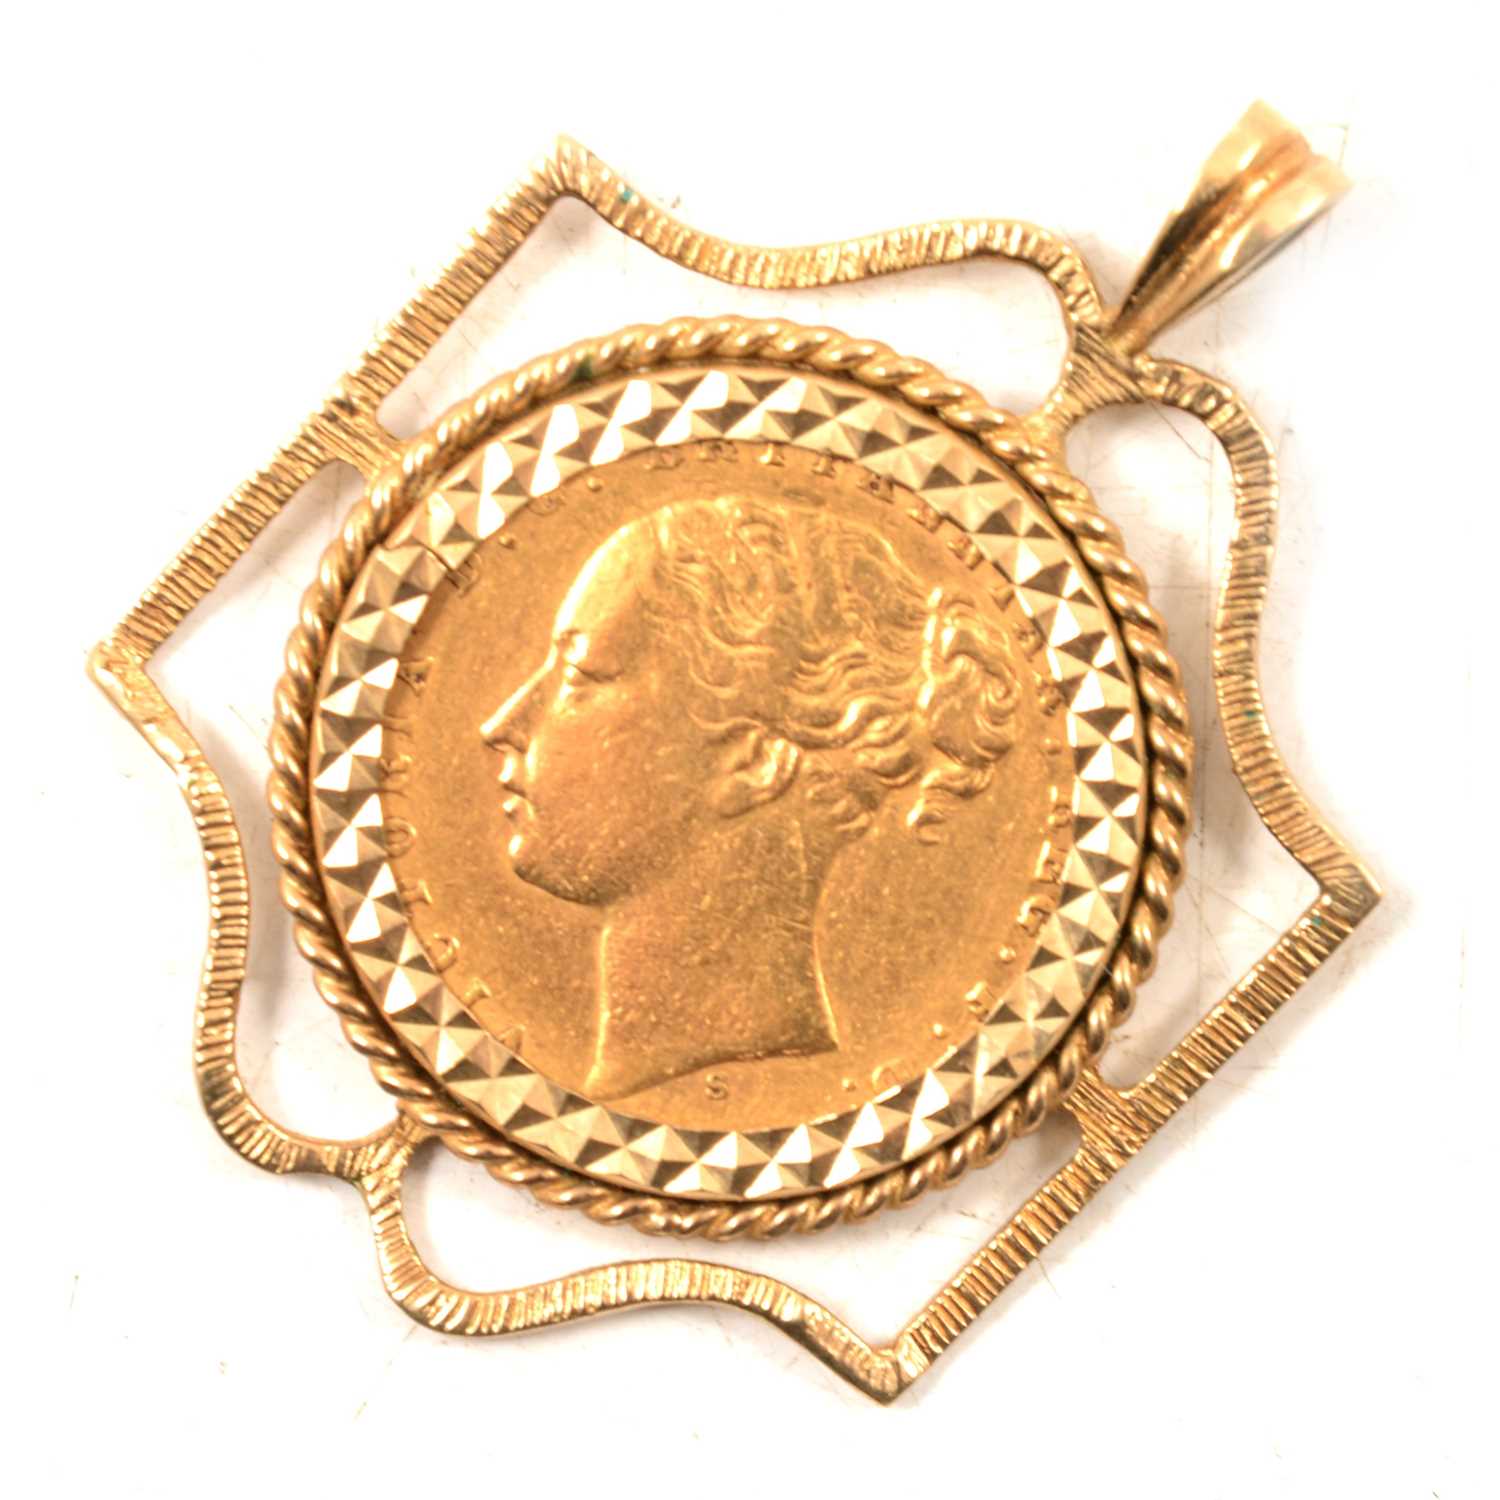 Buy 22ct Gold Quarter Sovereign Pendant Made in UK Online in India - Etsy